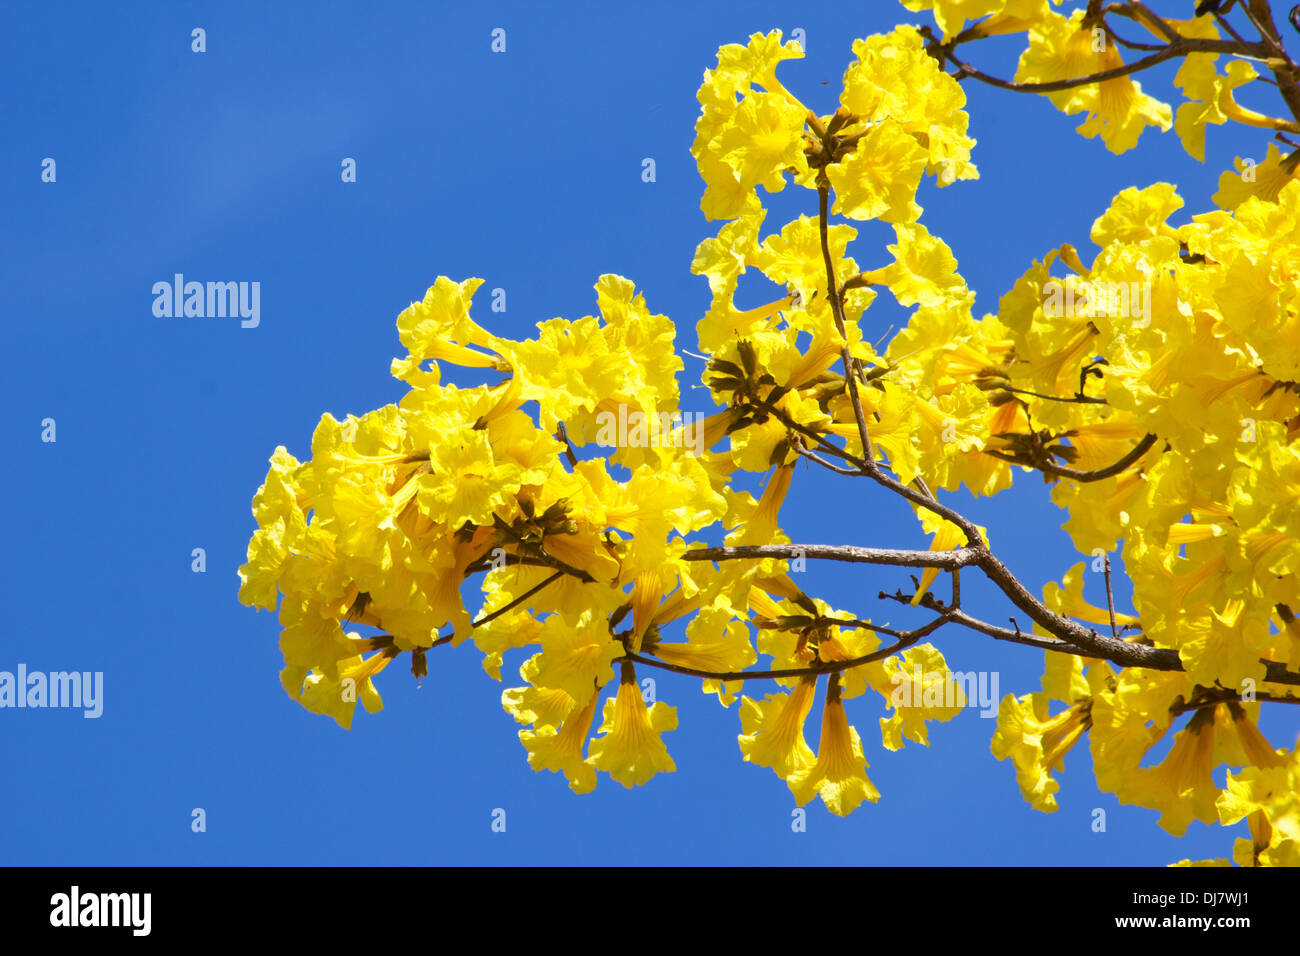 (Tabebuia chrysotricha) Golden trumpet tree blossoms against blue sky Stock Photo